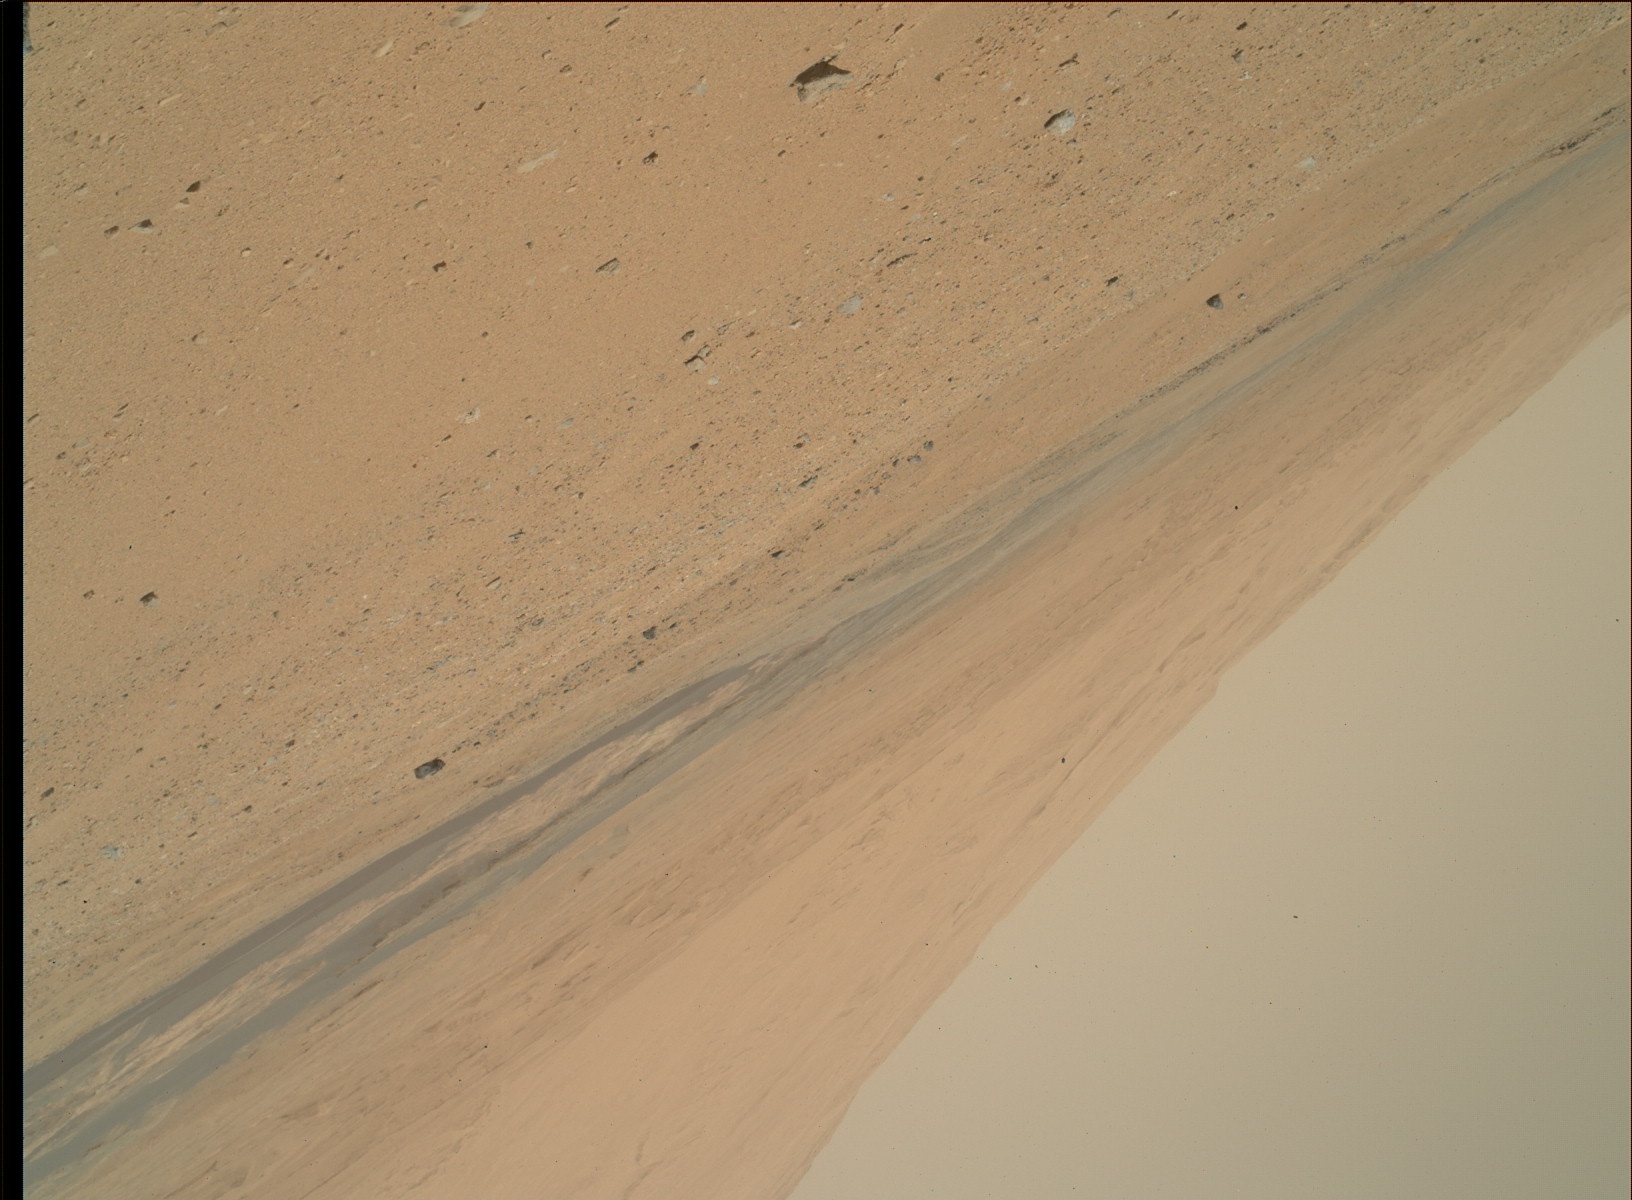 Nasa's Mars rover Curiosity acquired this image using its Mars Hand Lens Imager (MAHLI) on Sol 378